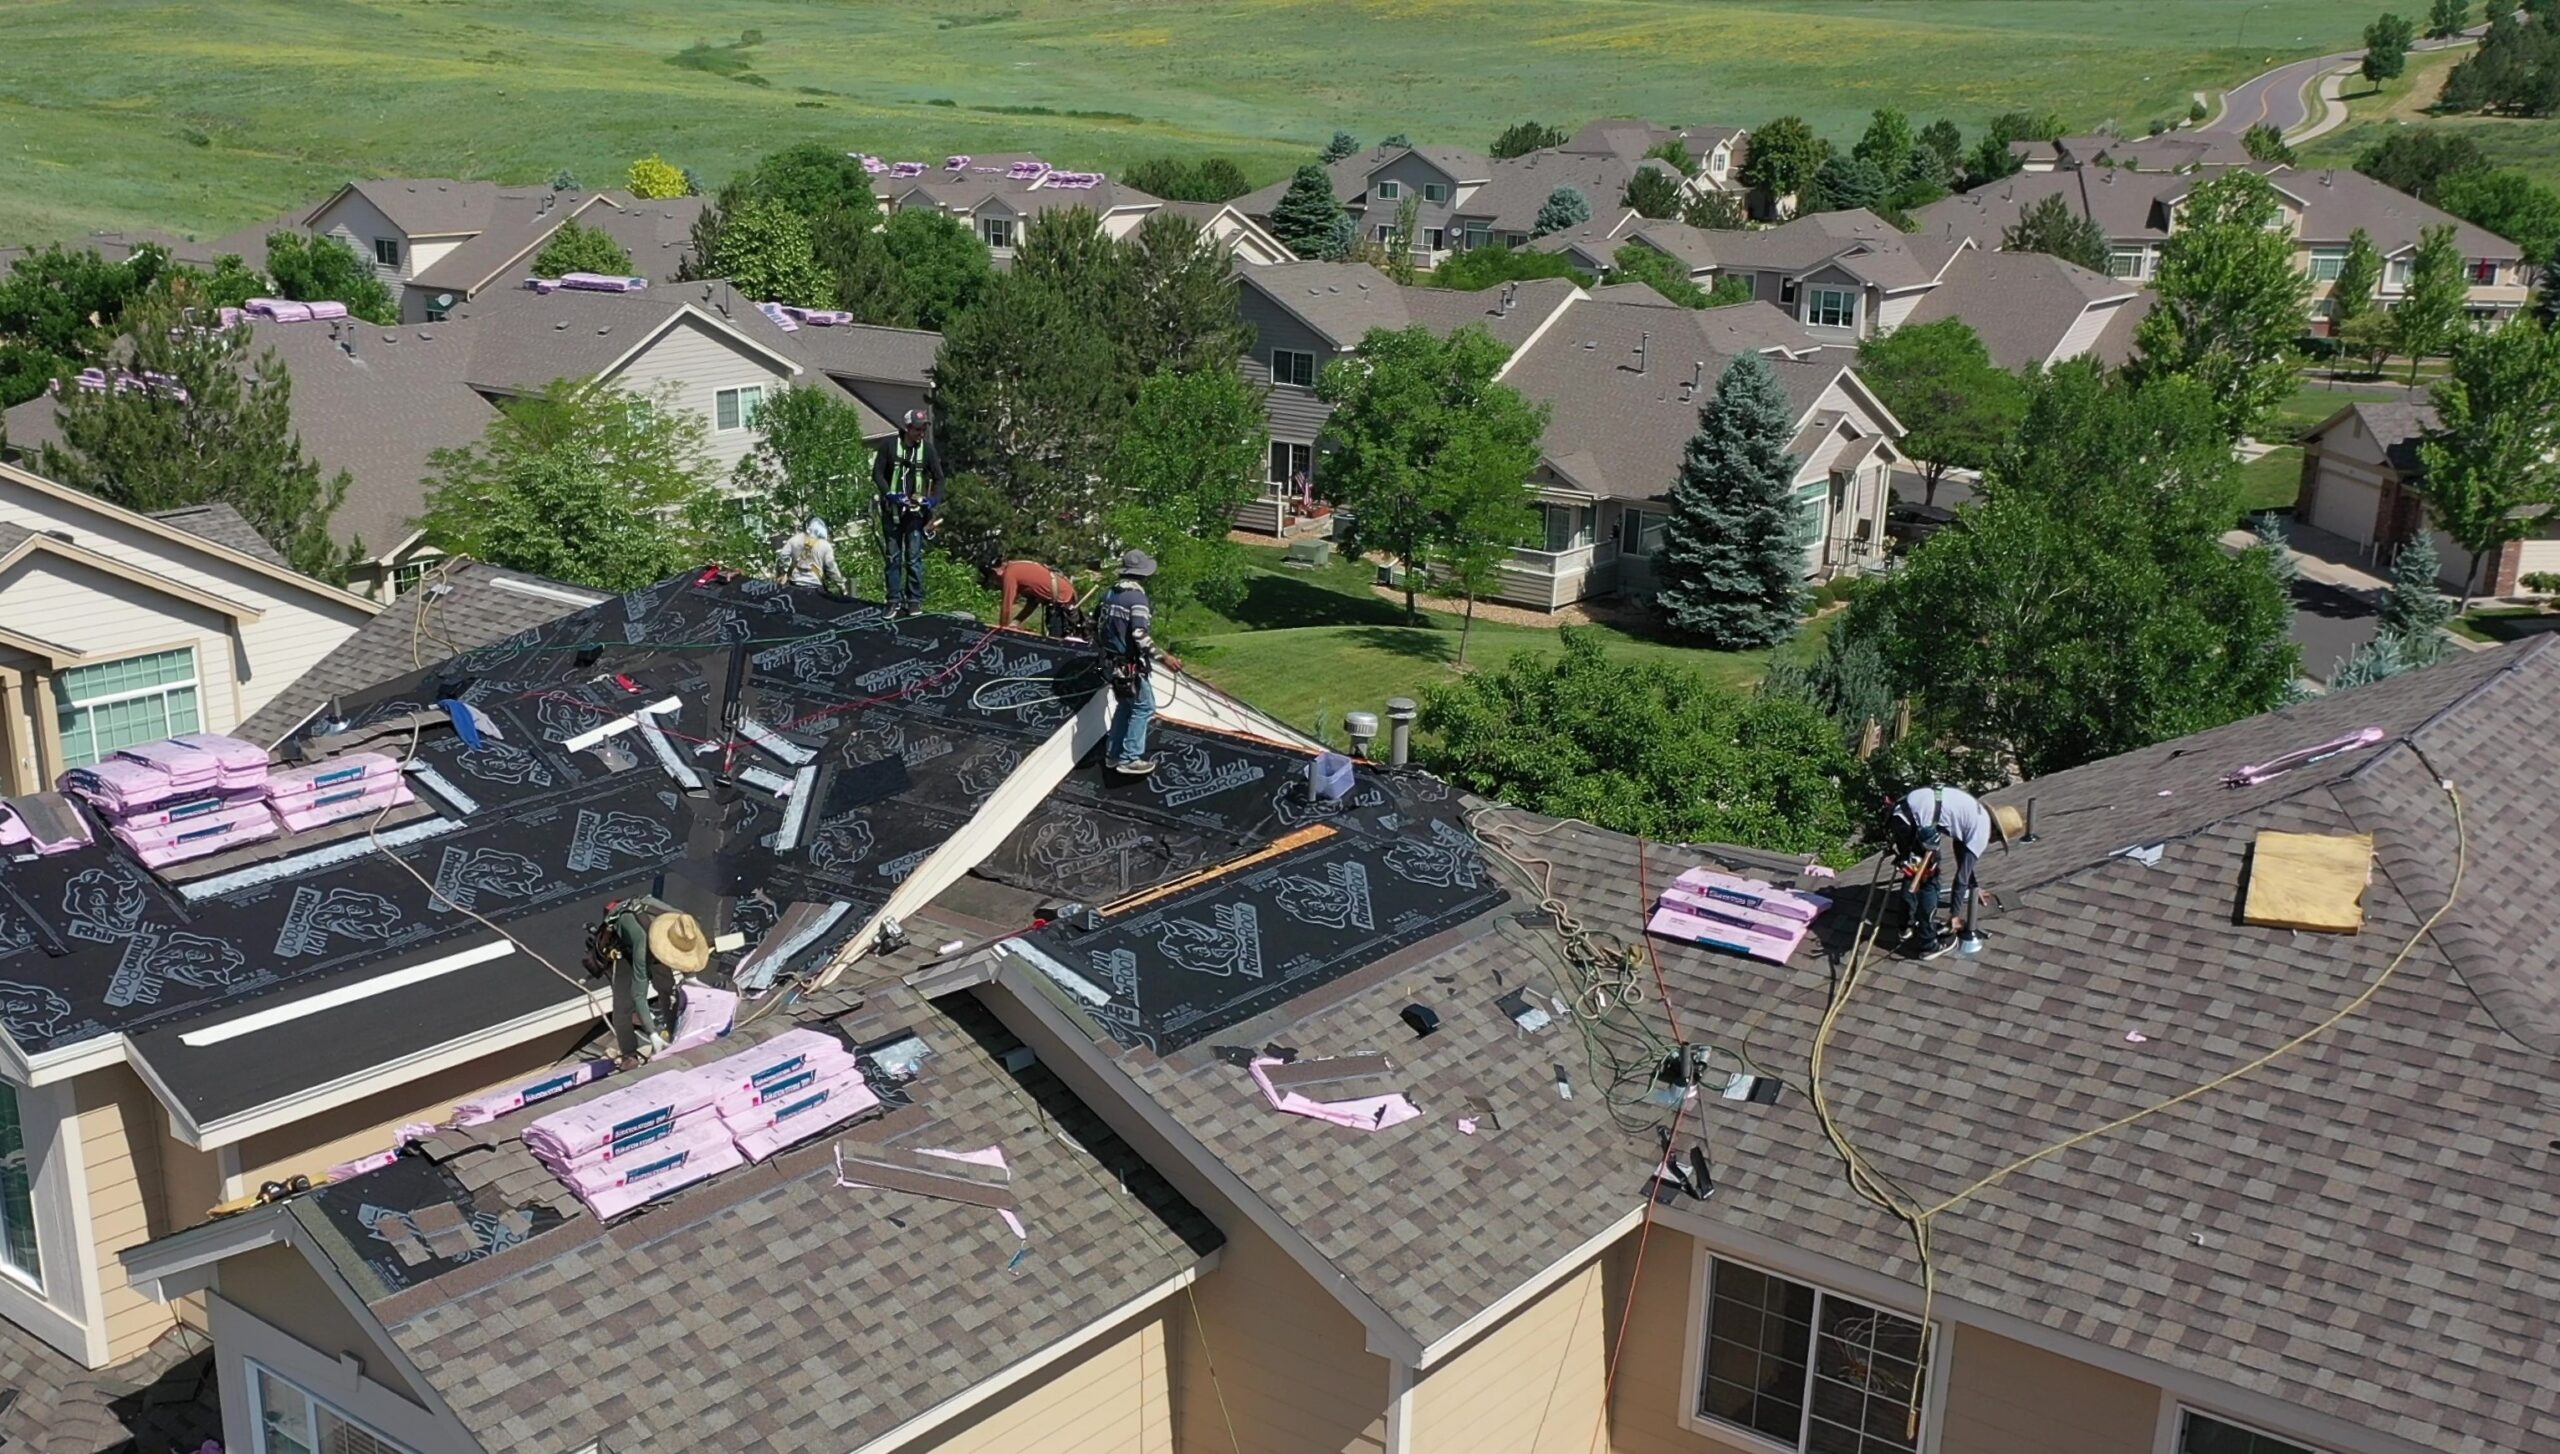 Roofers at work on a residential building with new roofing material and packs of Owens Corning insulation shingles visible, in a suburban neighborhood.